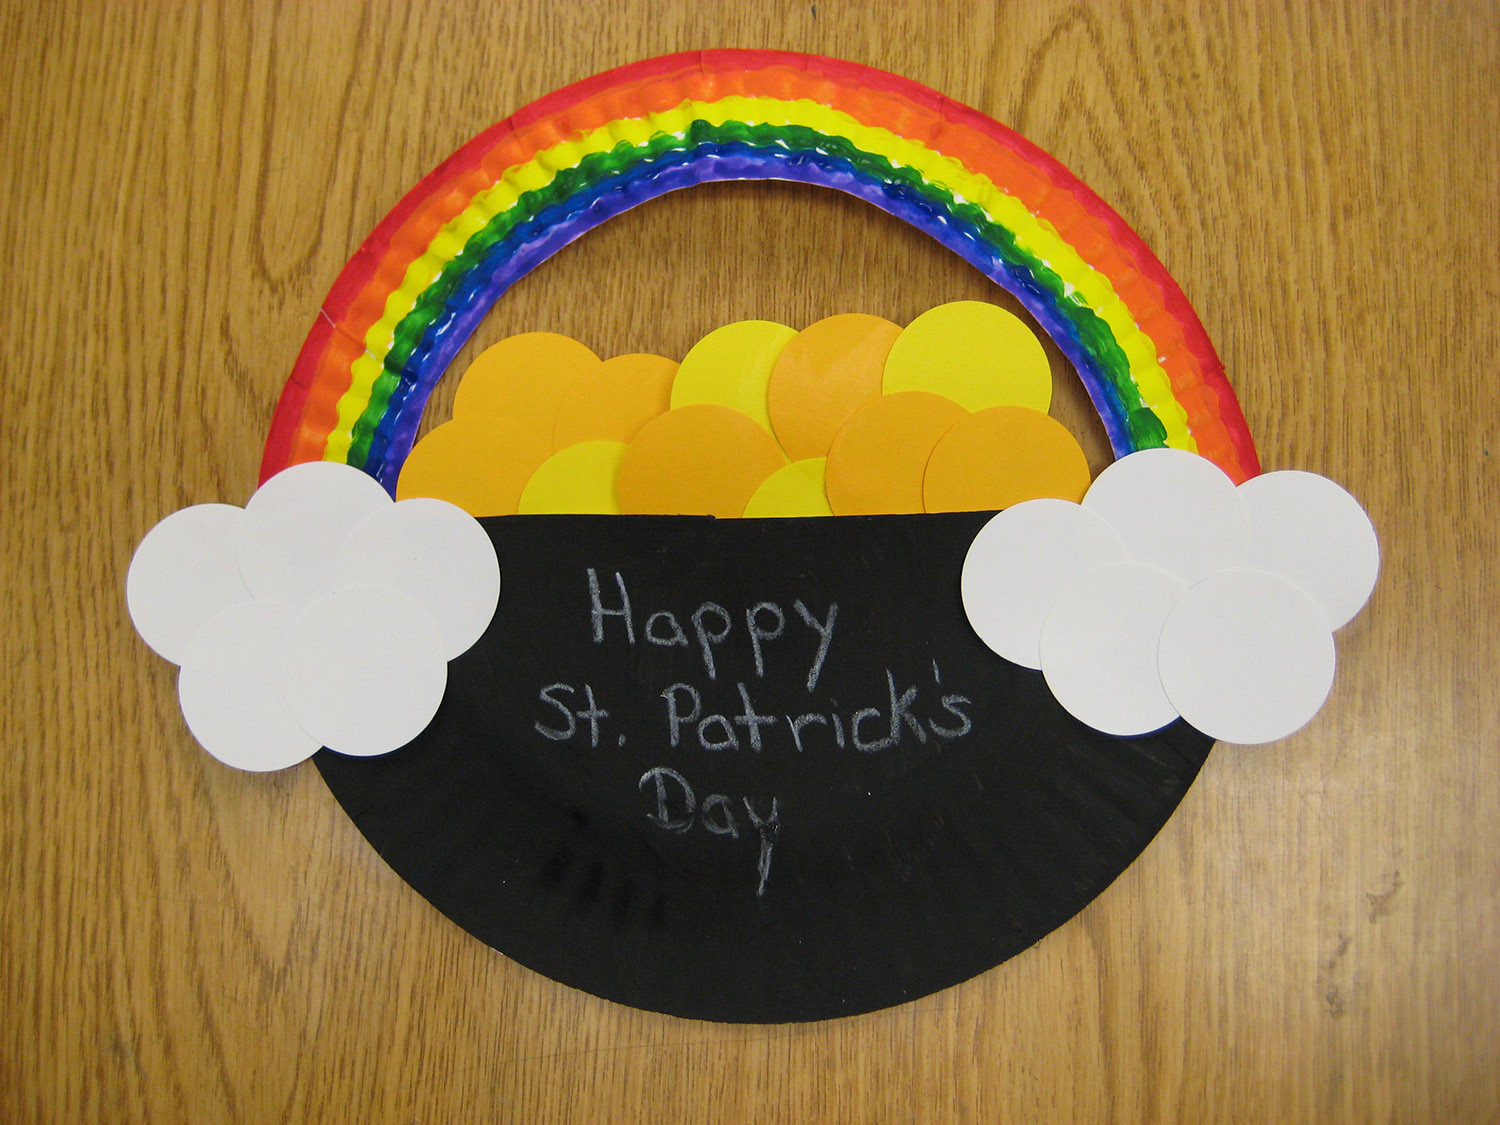 St Patrick Day Art And Crafts For Preschoolers
 Pot o Gold Craft Project